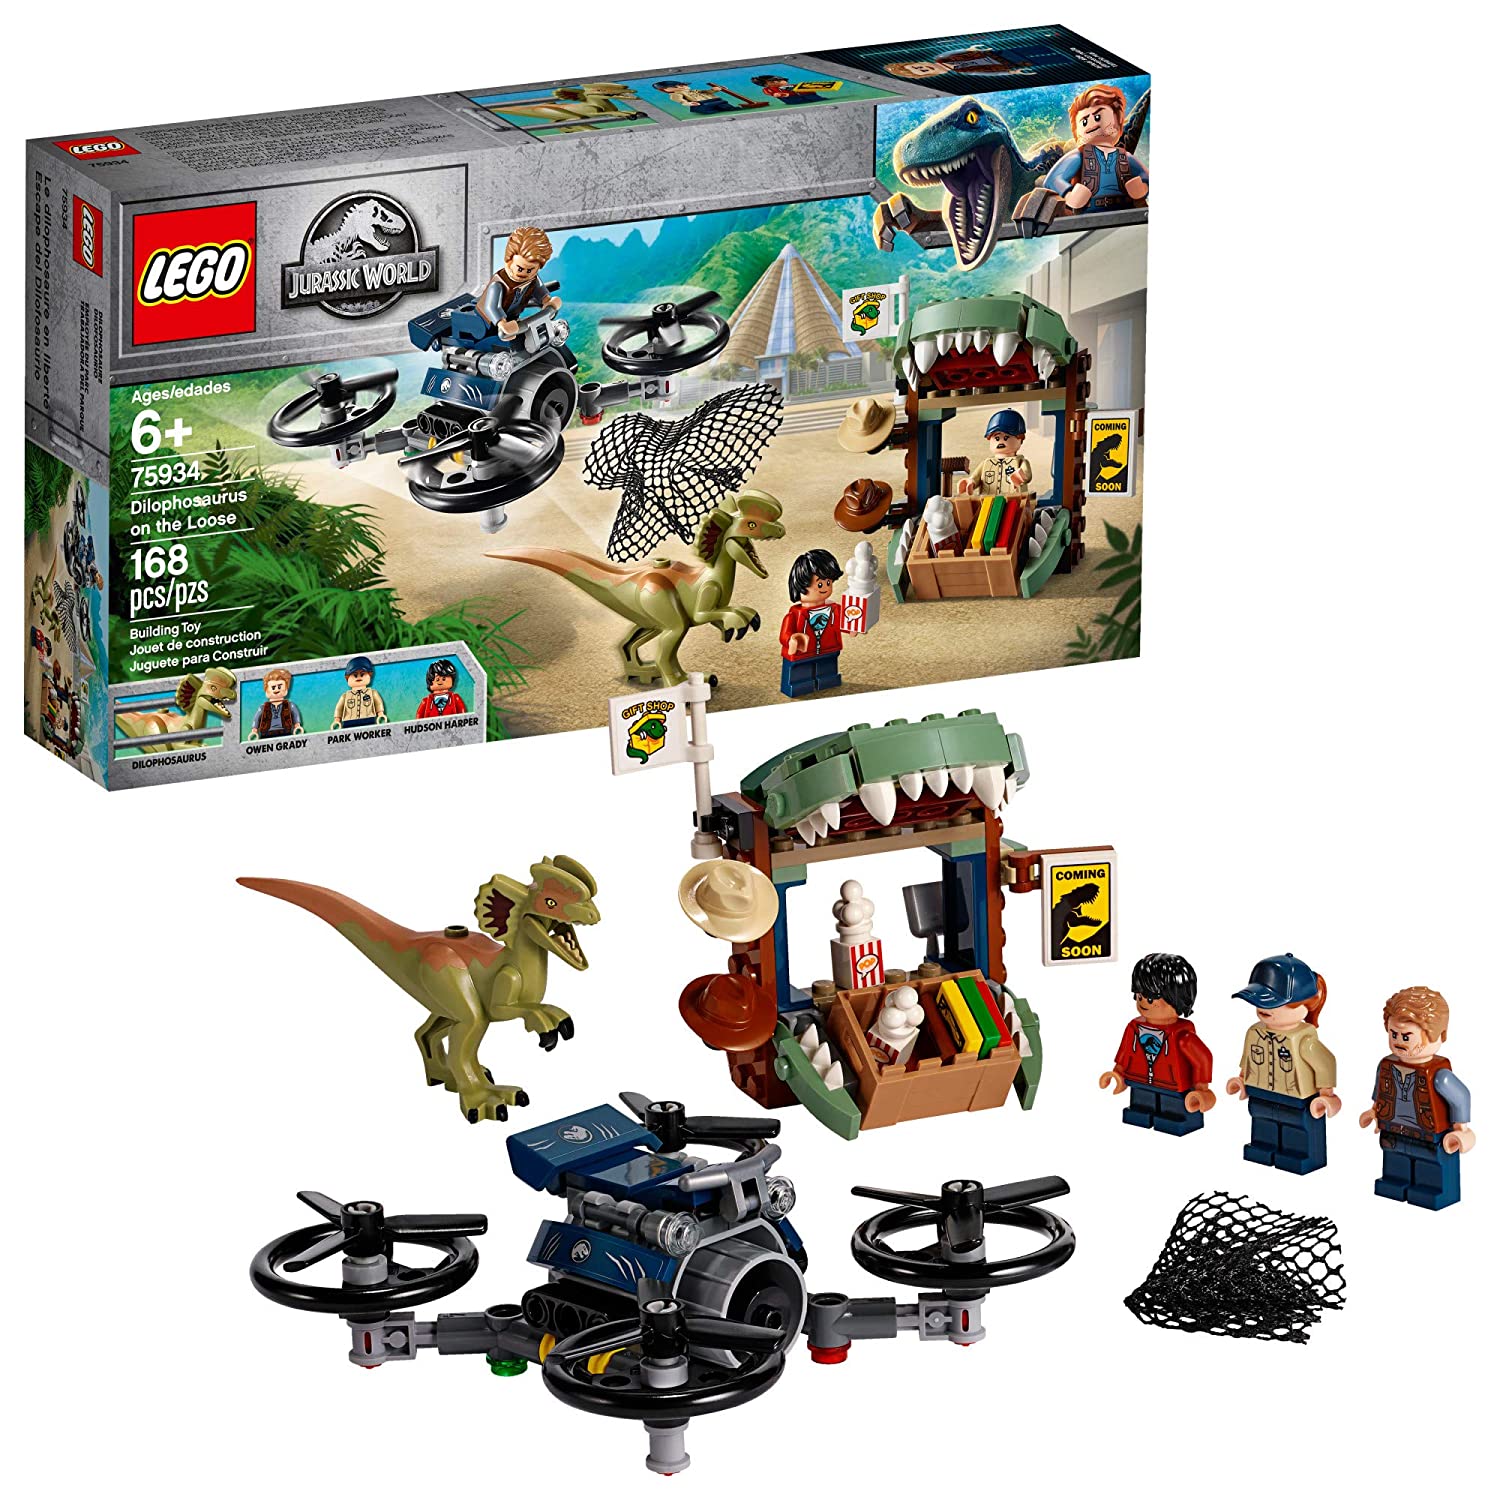 Top 8 Best Lego Dinosaurs Set Reviews in 2023 3